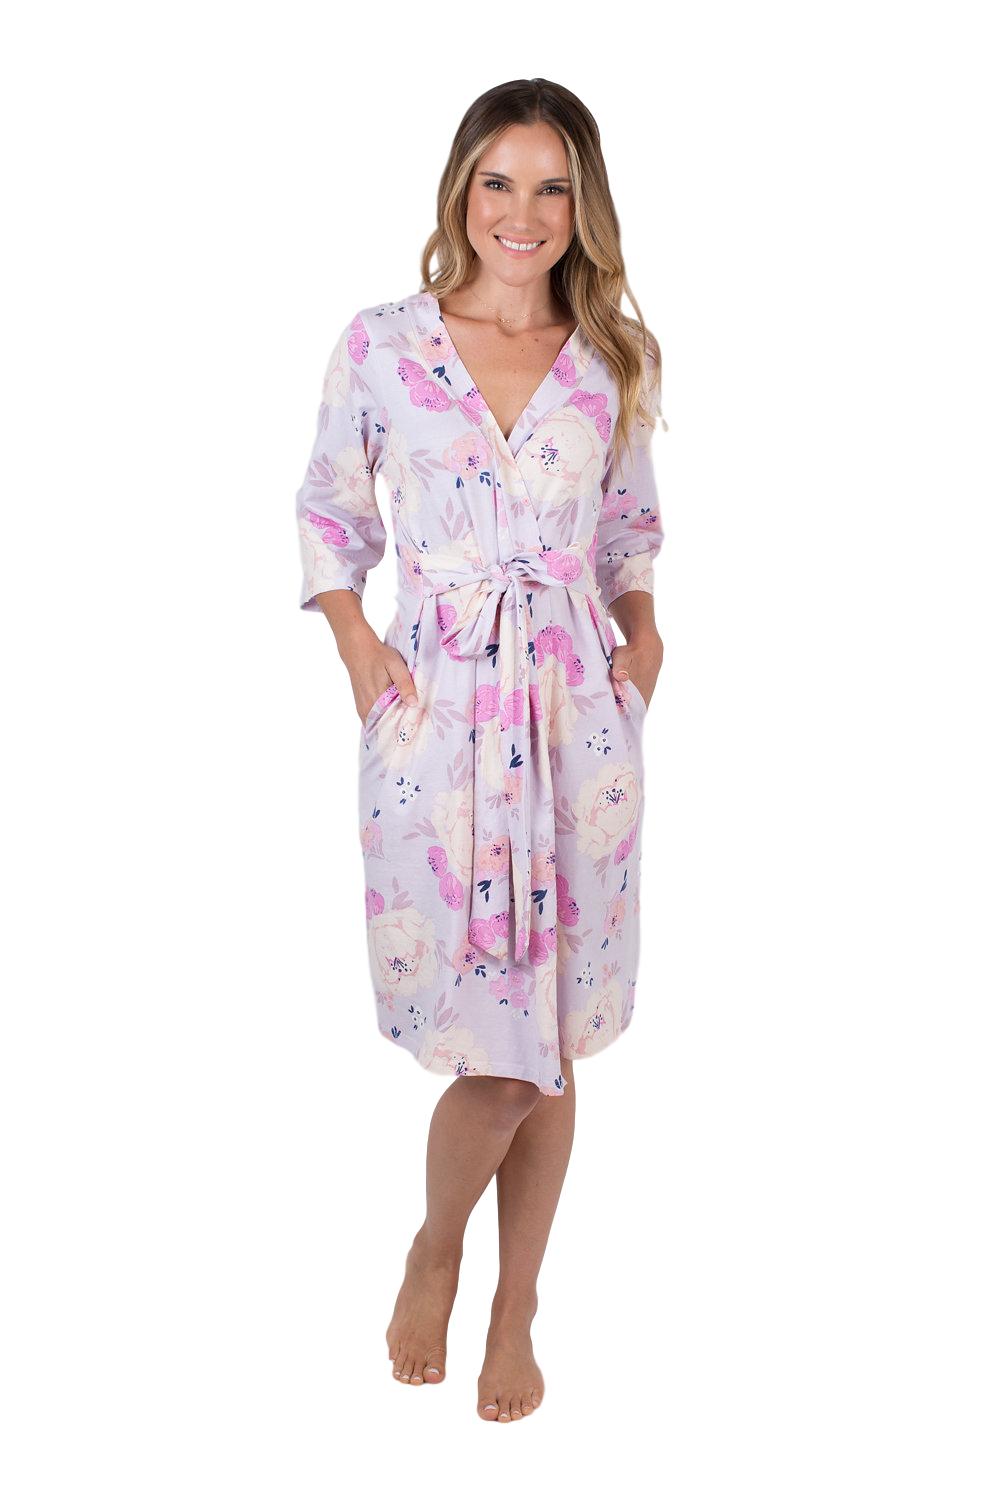 Anais purple and pink printed robe. Match with daughter for spa day with mom. Anais is a dainty, purple and pink flowered print. Knee length, 3/4 sleeve length.